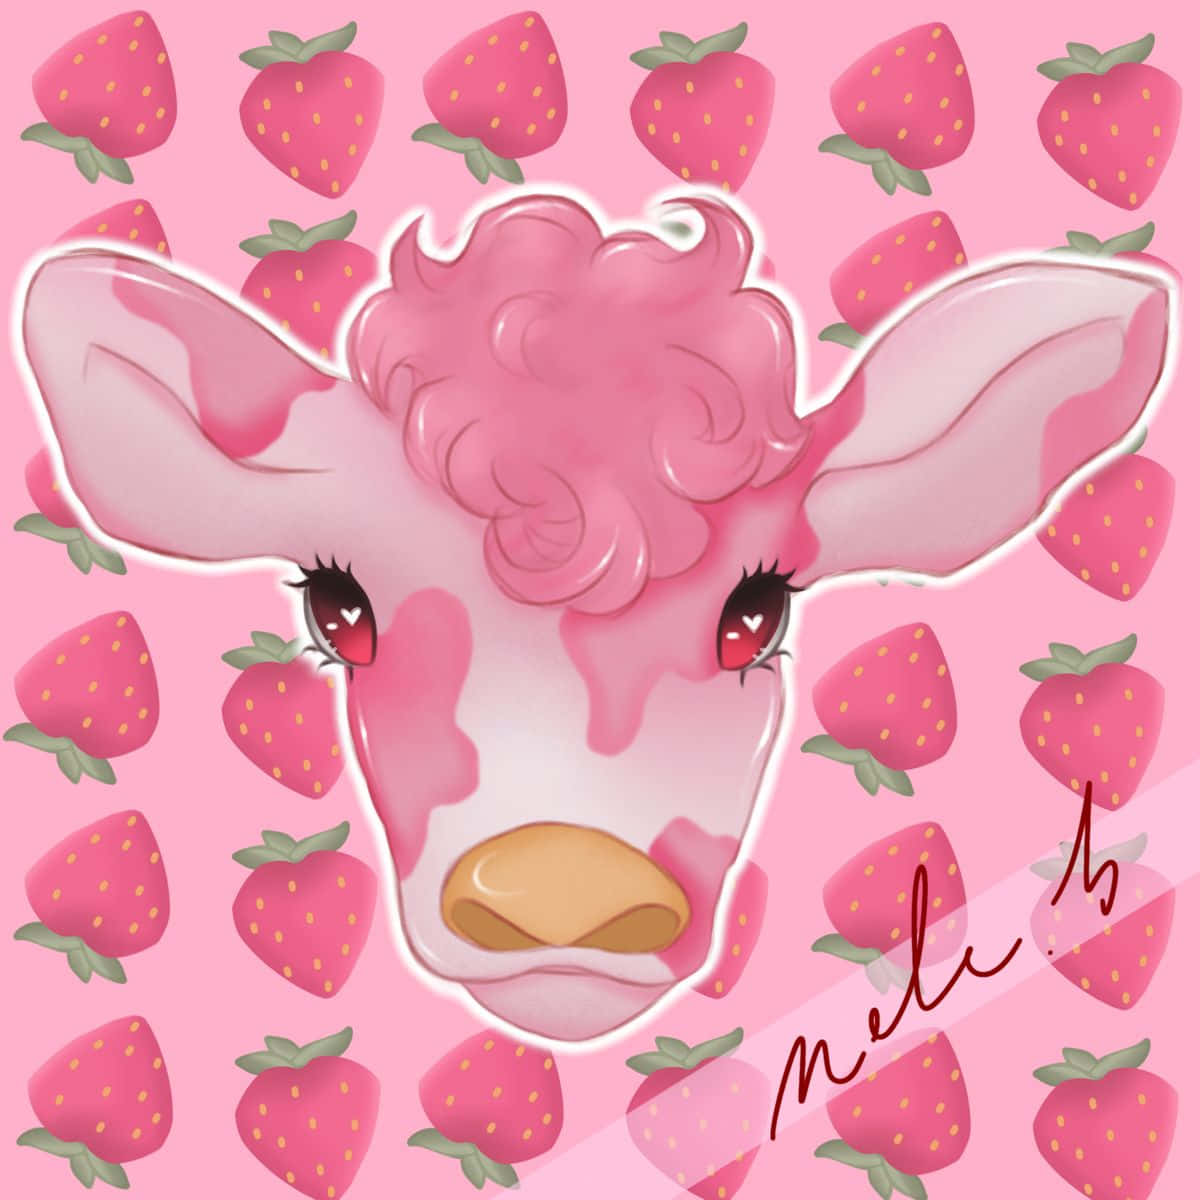 Spend Some Time Admiring This Beautiful Aesthetic Cow! Background